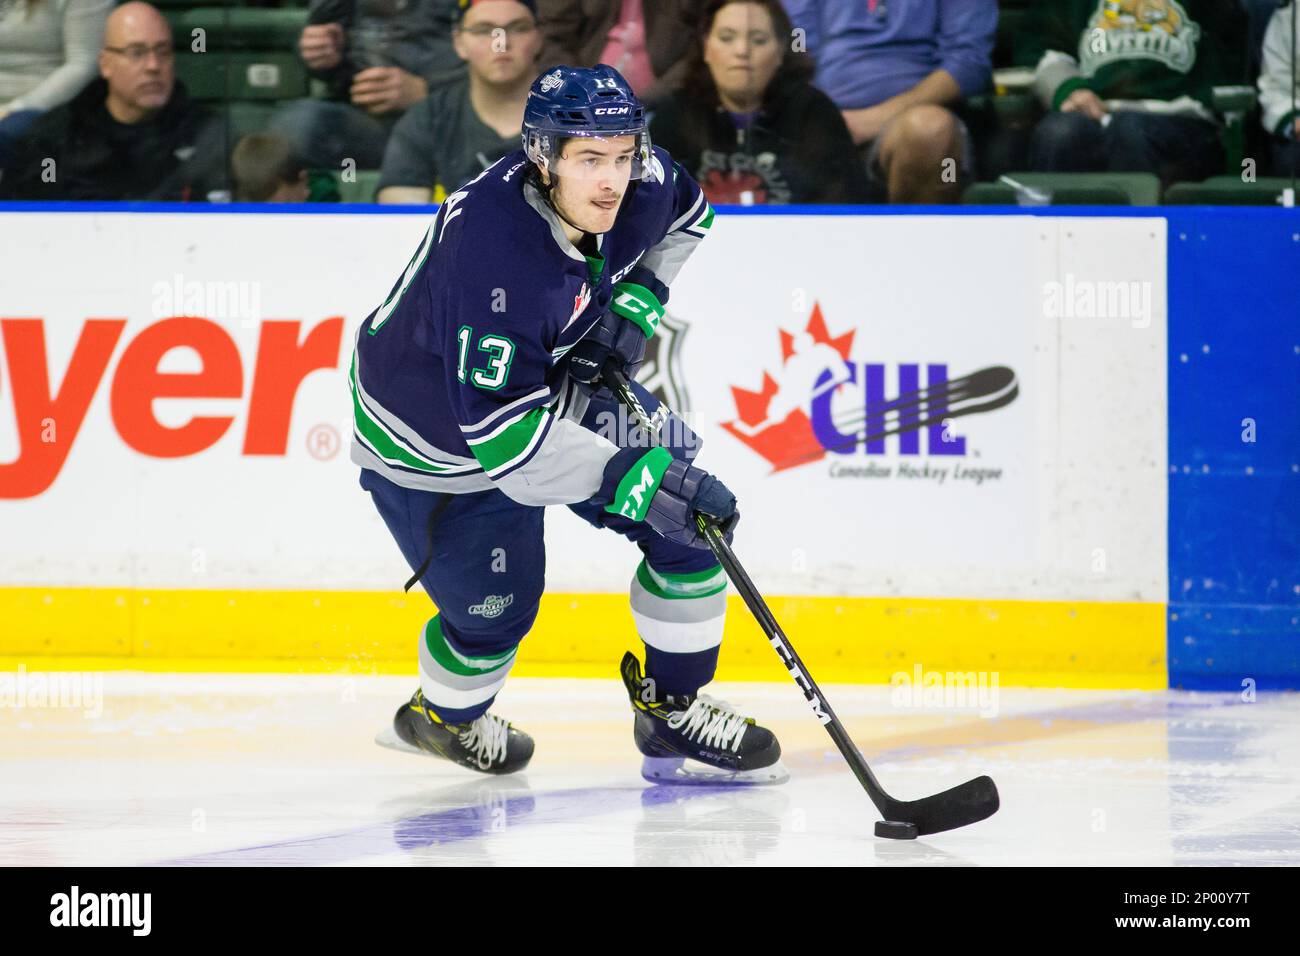 Seattle Thunderbirds forward Mathew Barzal (13) skates with the puck  against the Everett Silvertips on Sunday, Feb. 26, 2017 at ShoWare Center  in Kent, Washington. Seattle defeated Everett by a final score